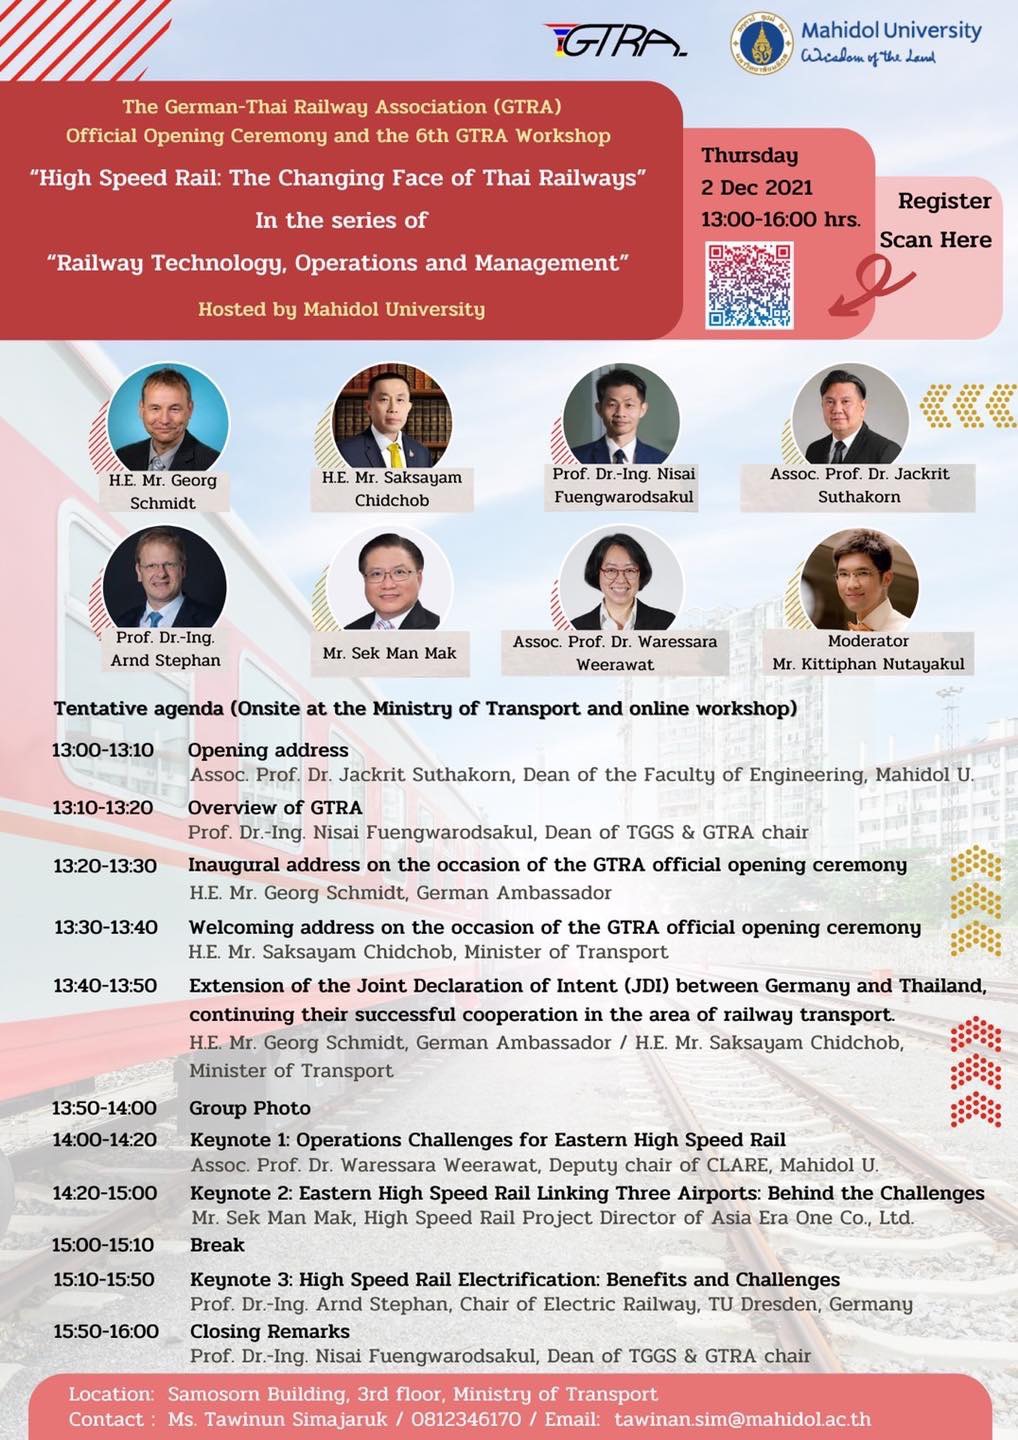 The German-Thai Railway Association (GTRA) Official Opening Ceremony and the 6th GTRA Workshop<br>"High Speed Rail: The Changing Face of Thai Railways"<br>In the series of "Railway Technology, Operations and Management" @ กระทรวงคมนาคม